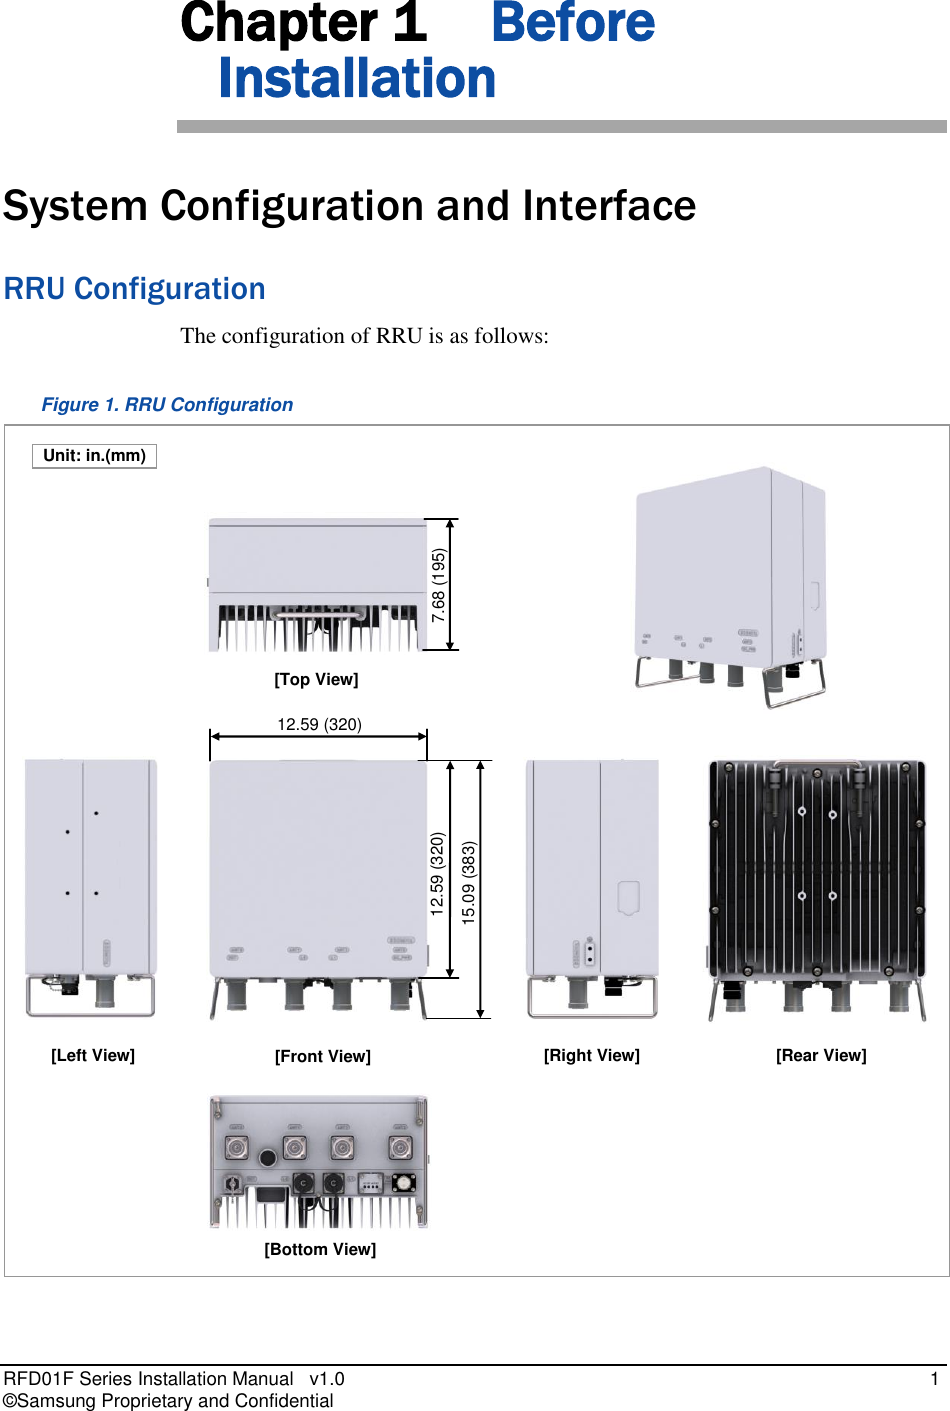  RFD01F Series Installation Manual   v1.0    1 © Samsung Proprietary and Confidential Chapter 1 Before Installation System Configuration and Interface RRU Configuration The configuration of RRU is as follows: Figure 1. RRU Configuration  [Bottom View] 12.59 (320) [Front View] [Top View] [Left View] [Right View] [Rear View] 15.09 (383) 7.68 (195) 12.59 (320)  Unit: in.(mm) 